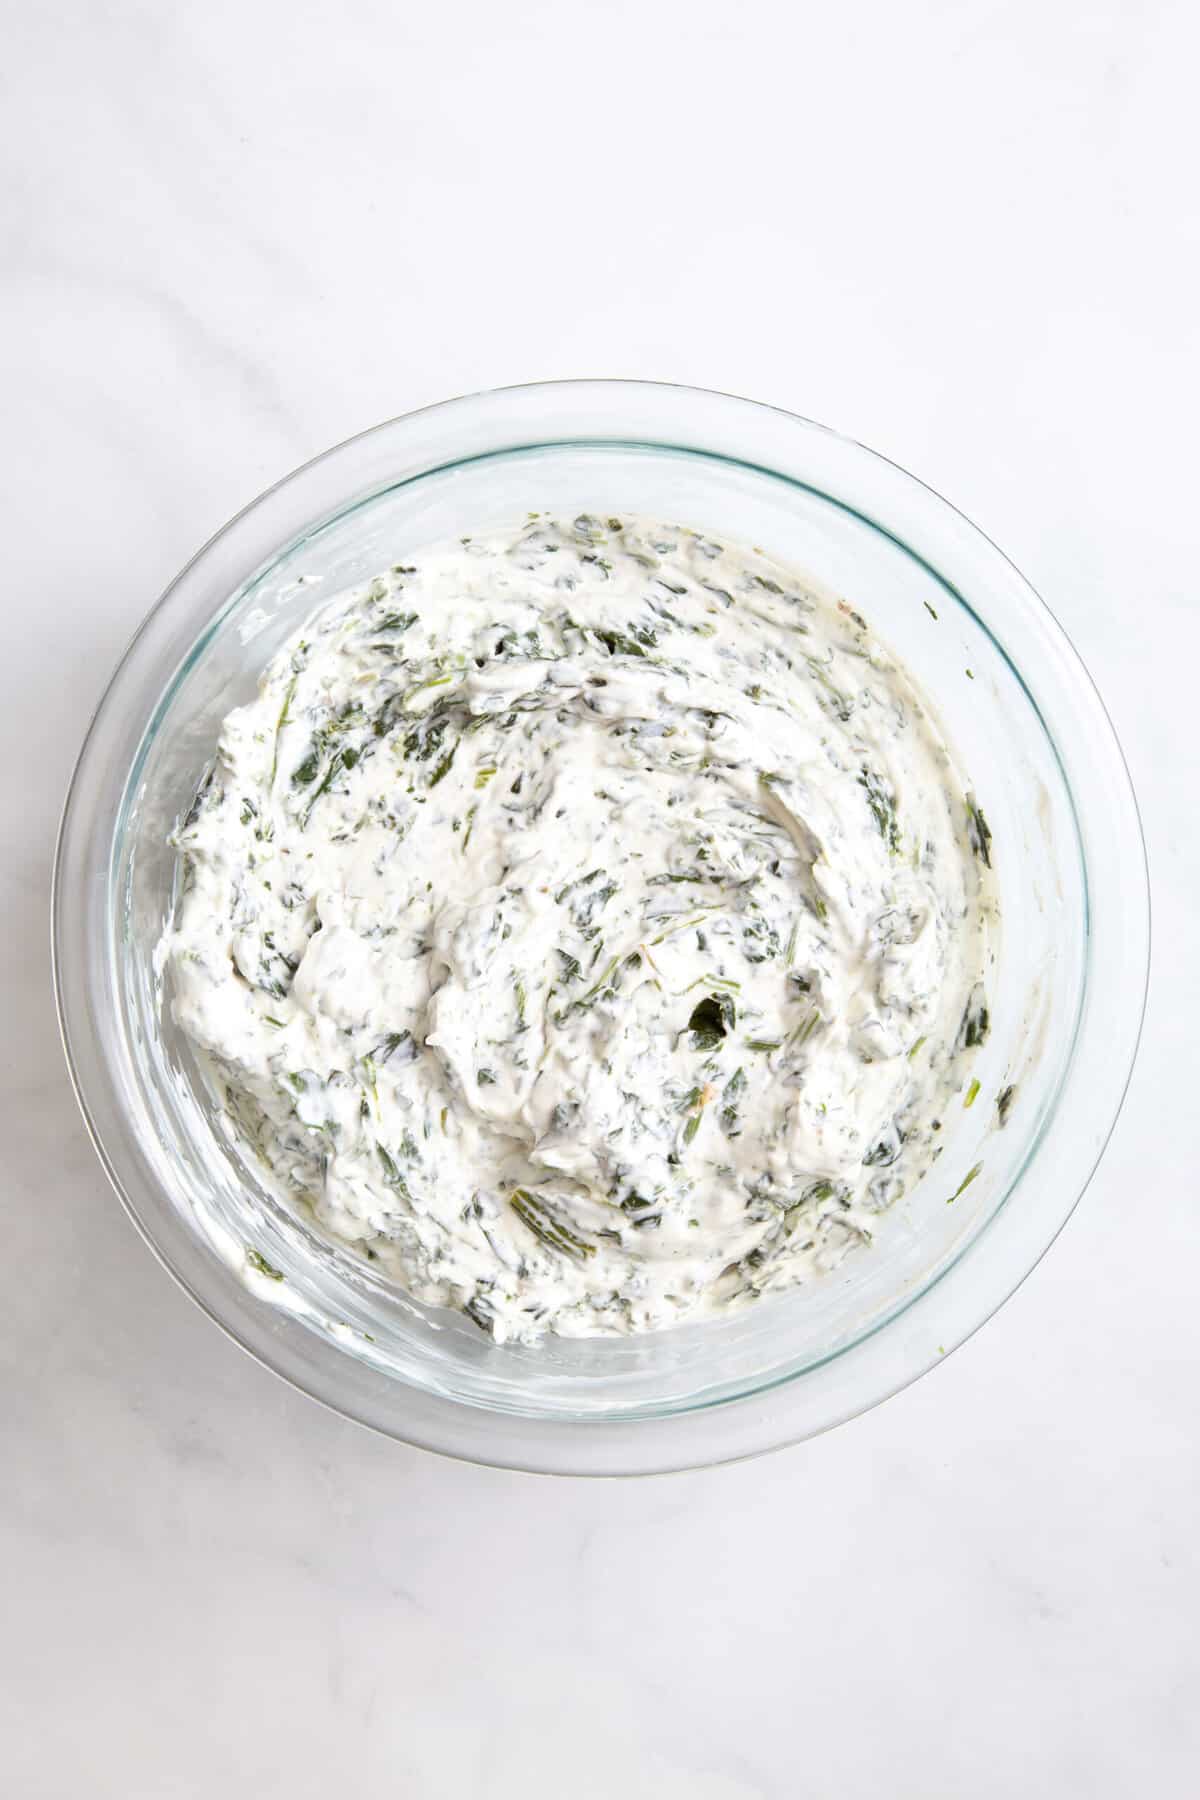 mayonnaise, sour cream, worcestershire sauce, knorr seasoning, salt and pepper stirred together in a large glass bowl